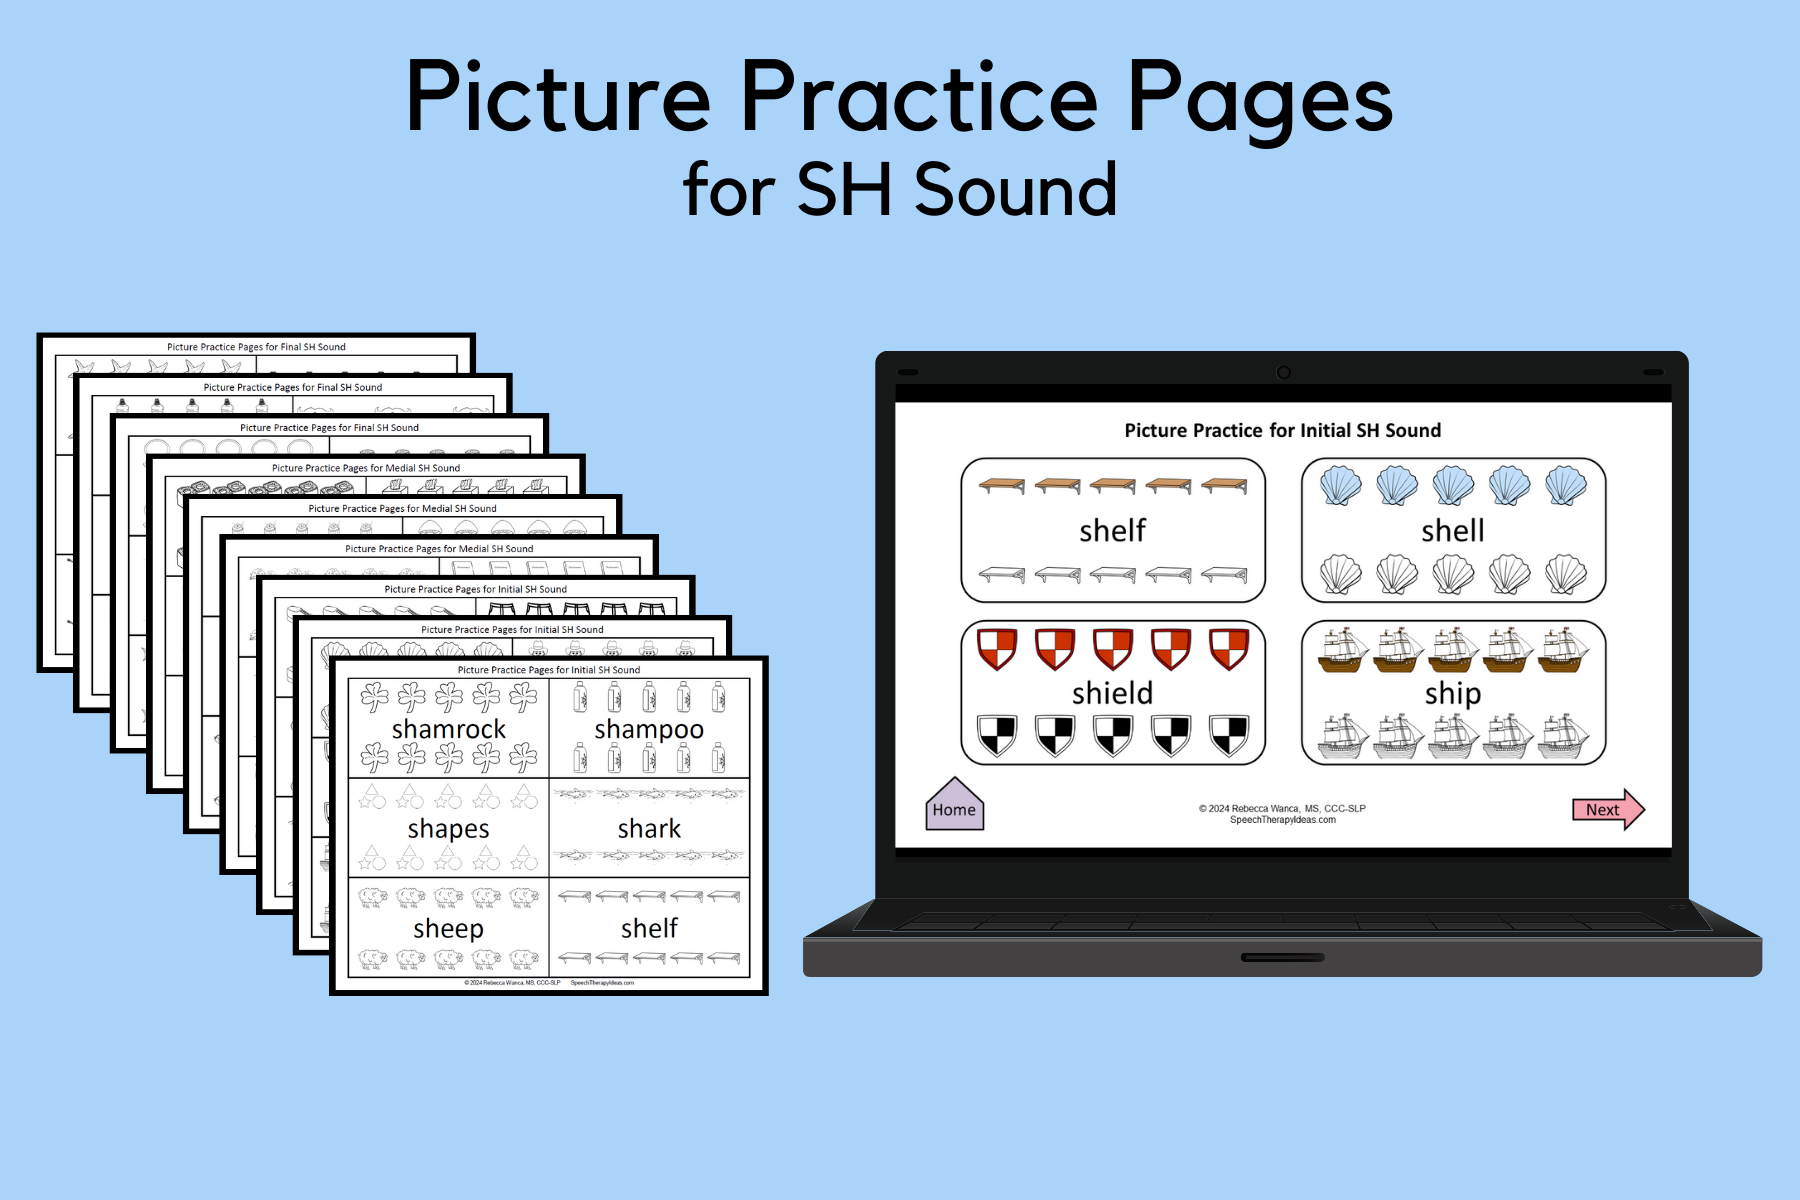 Picture Practice Pages for SH Sound